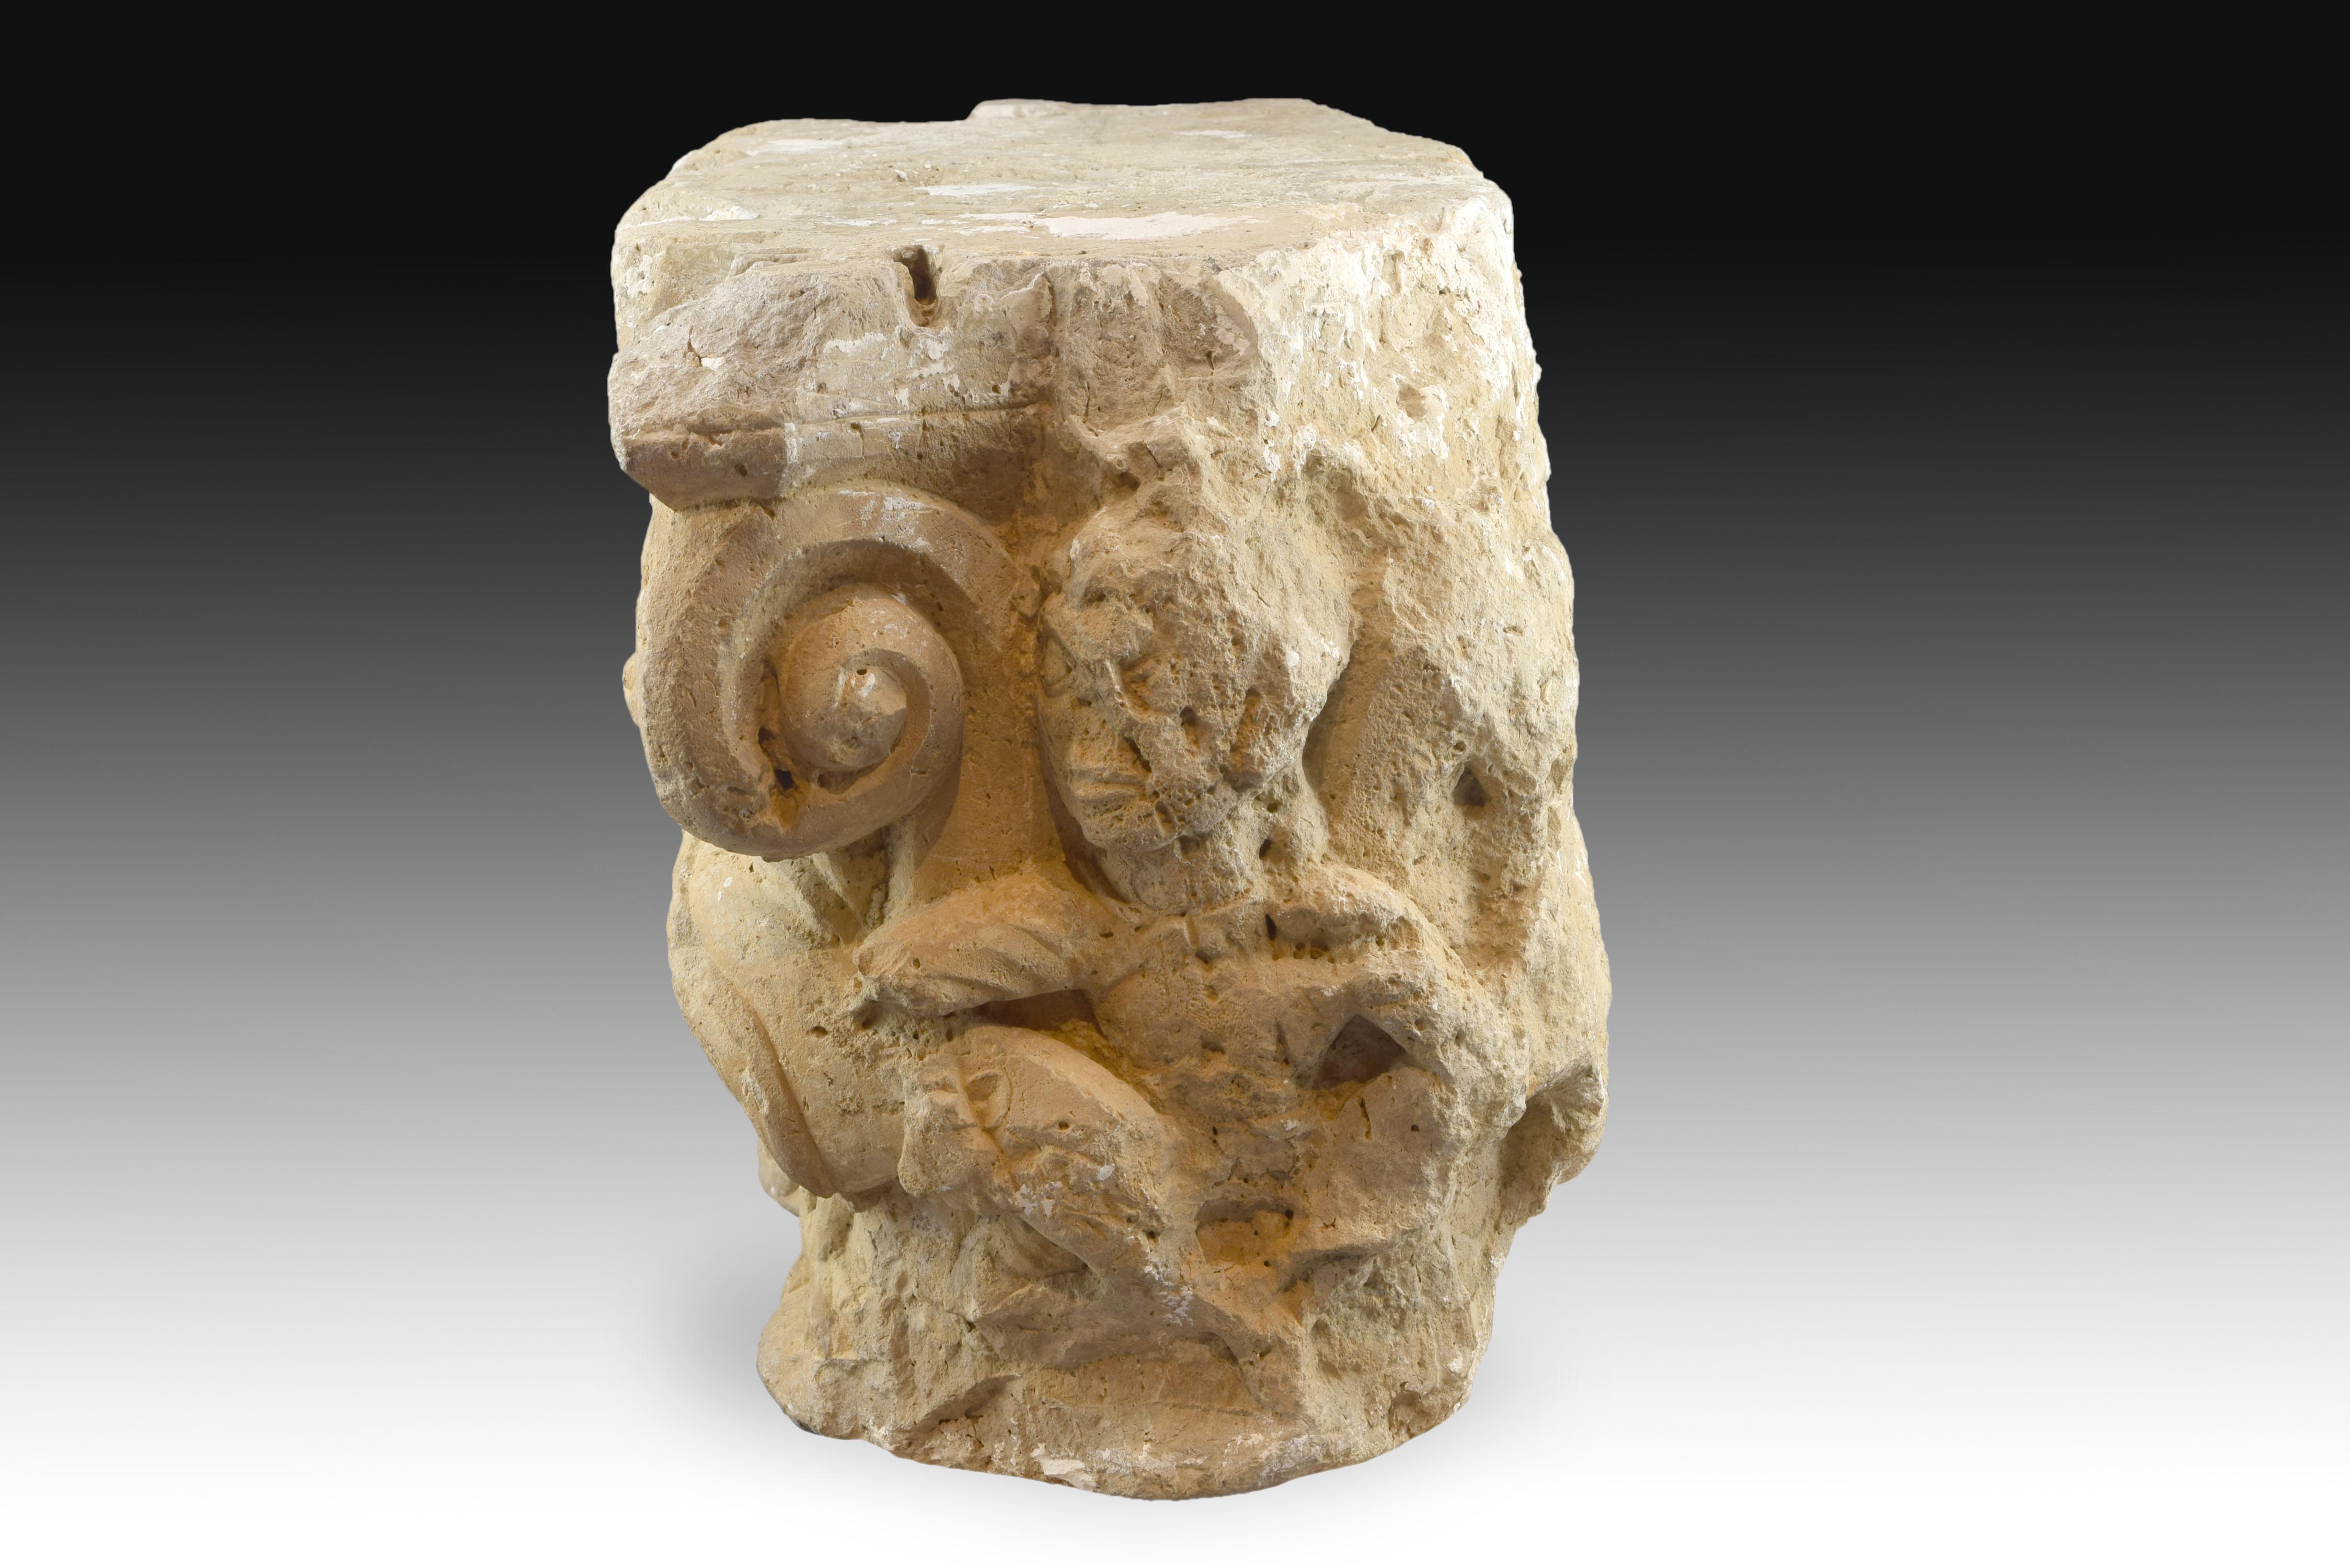 Hand-Carved Capital, Limestone, 12th-13th Century